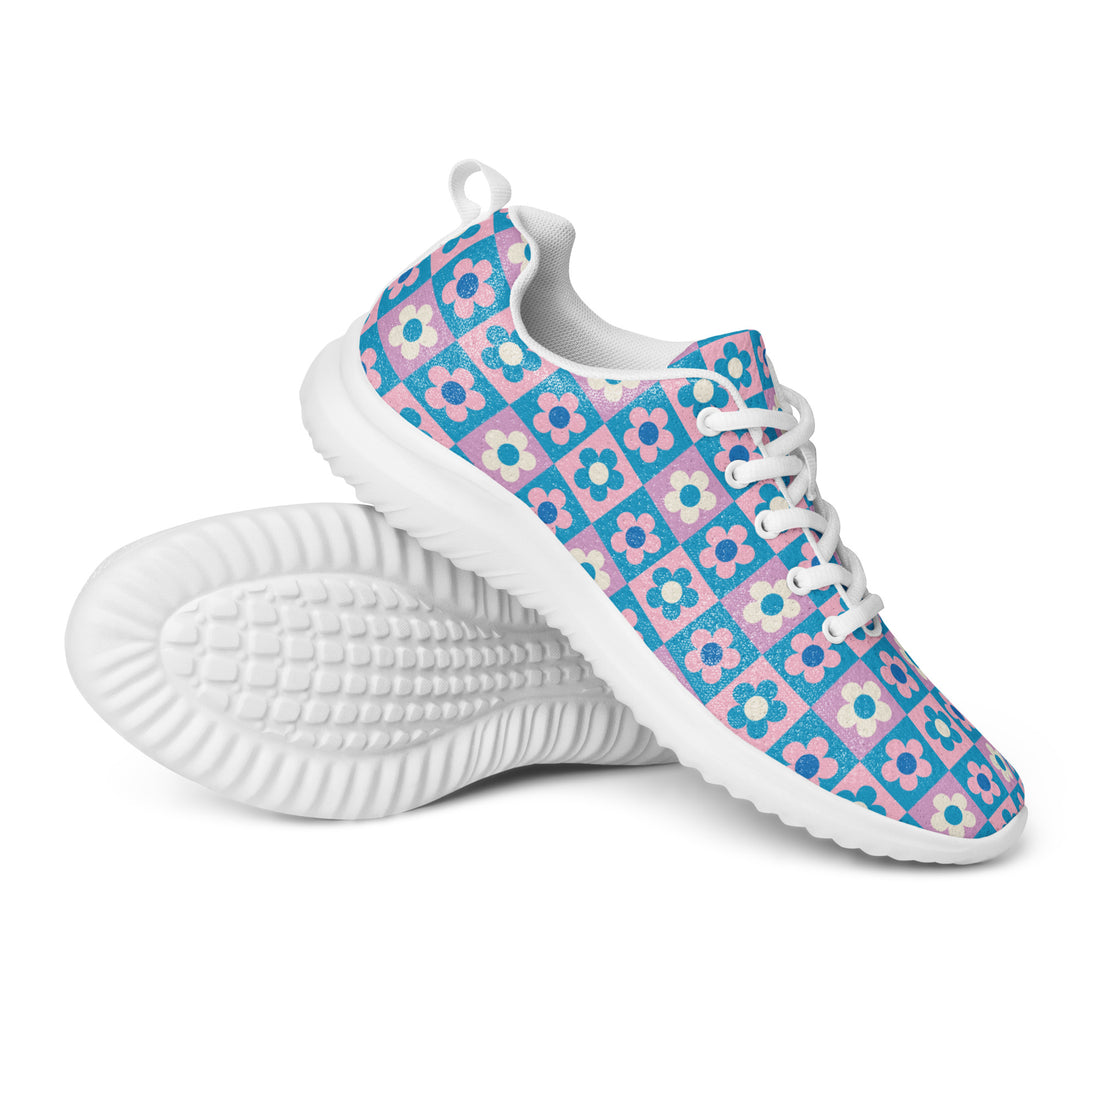 Groovy Cool Women’s Athletic Shoes